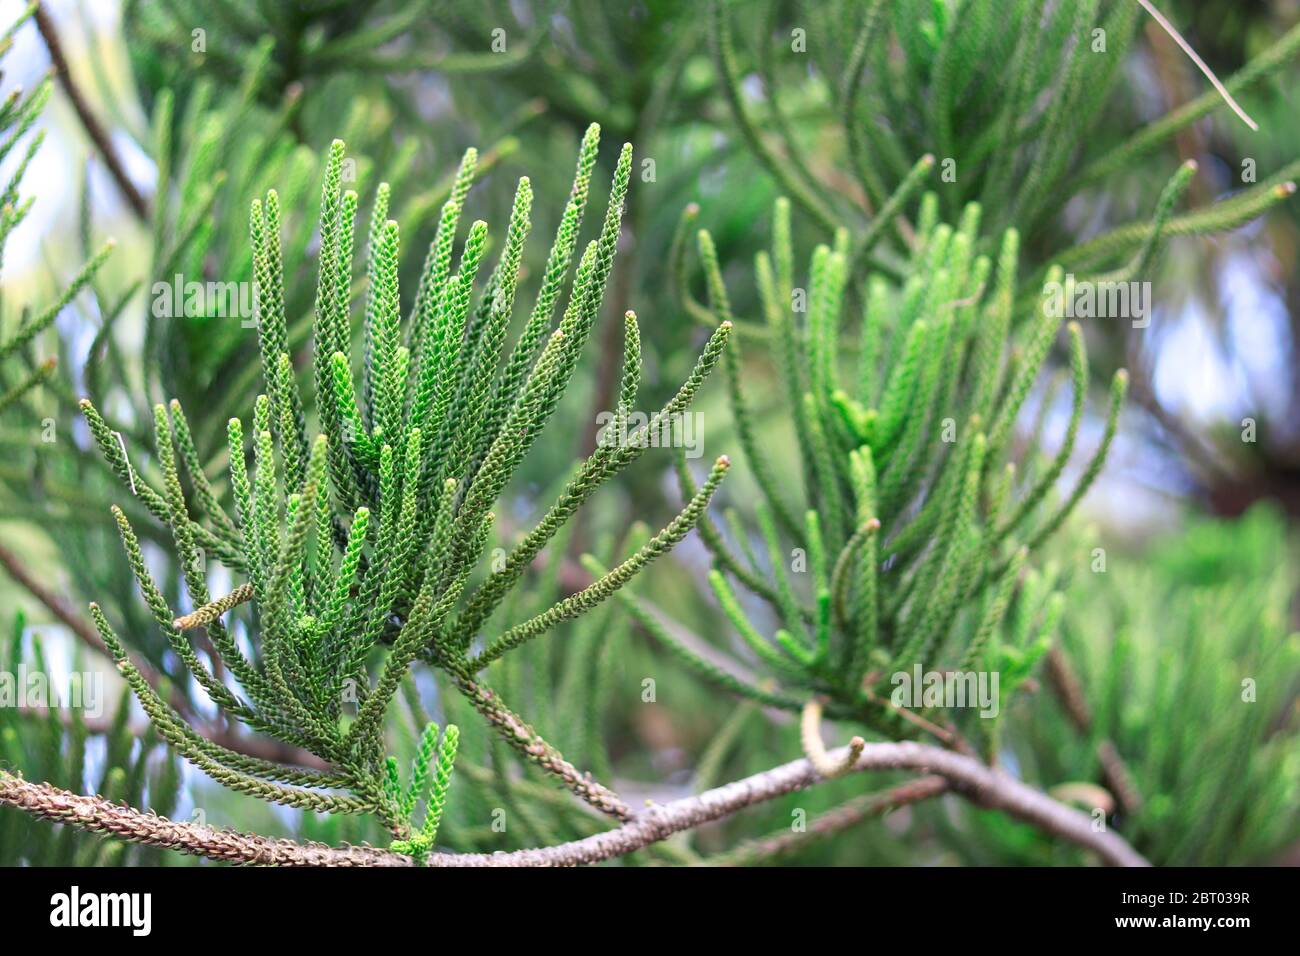 The leaves of pine on the brunch with blurred background. Stock Photo